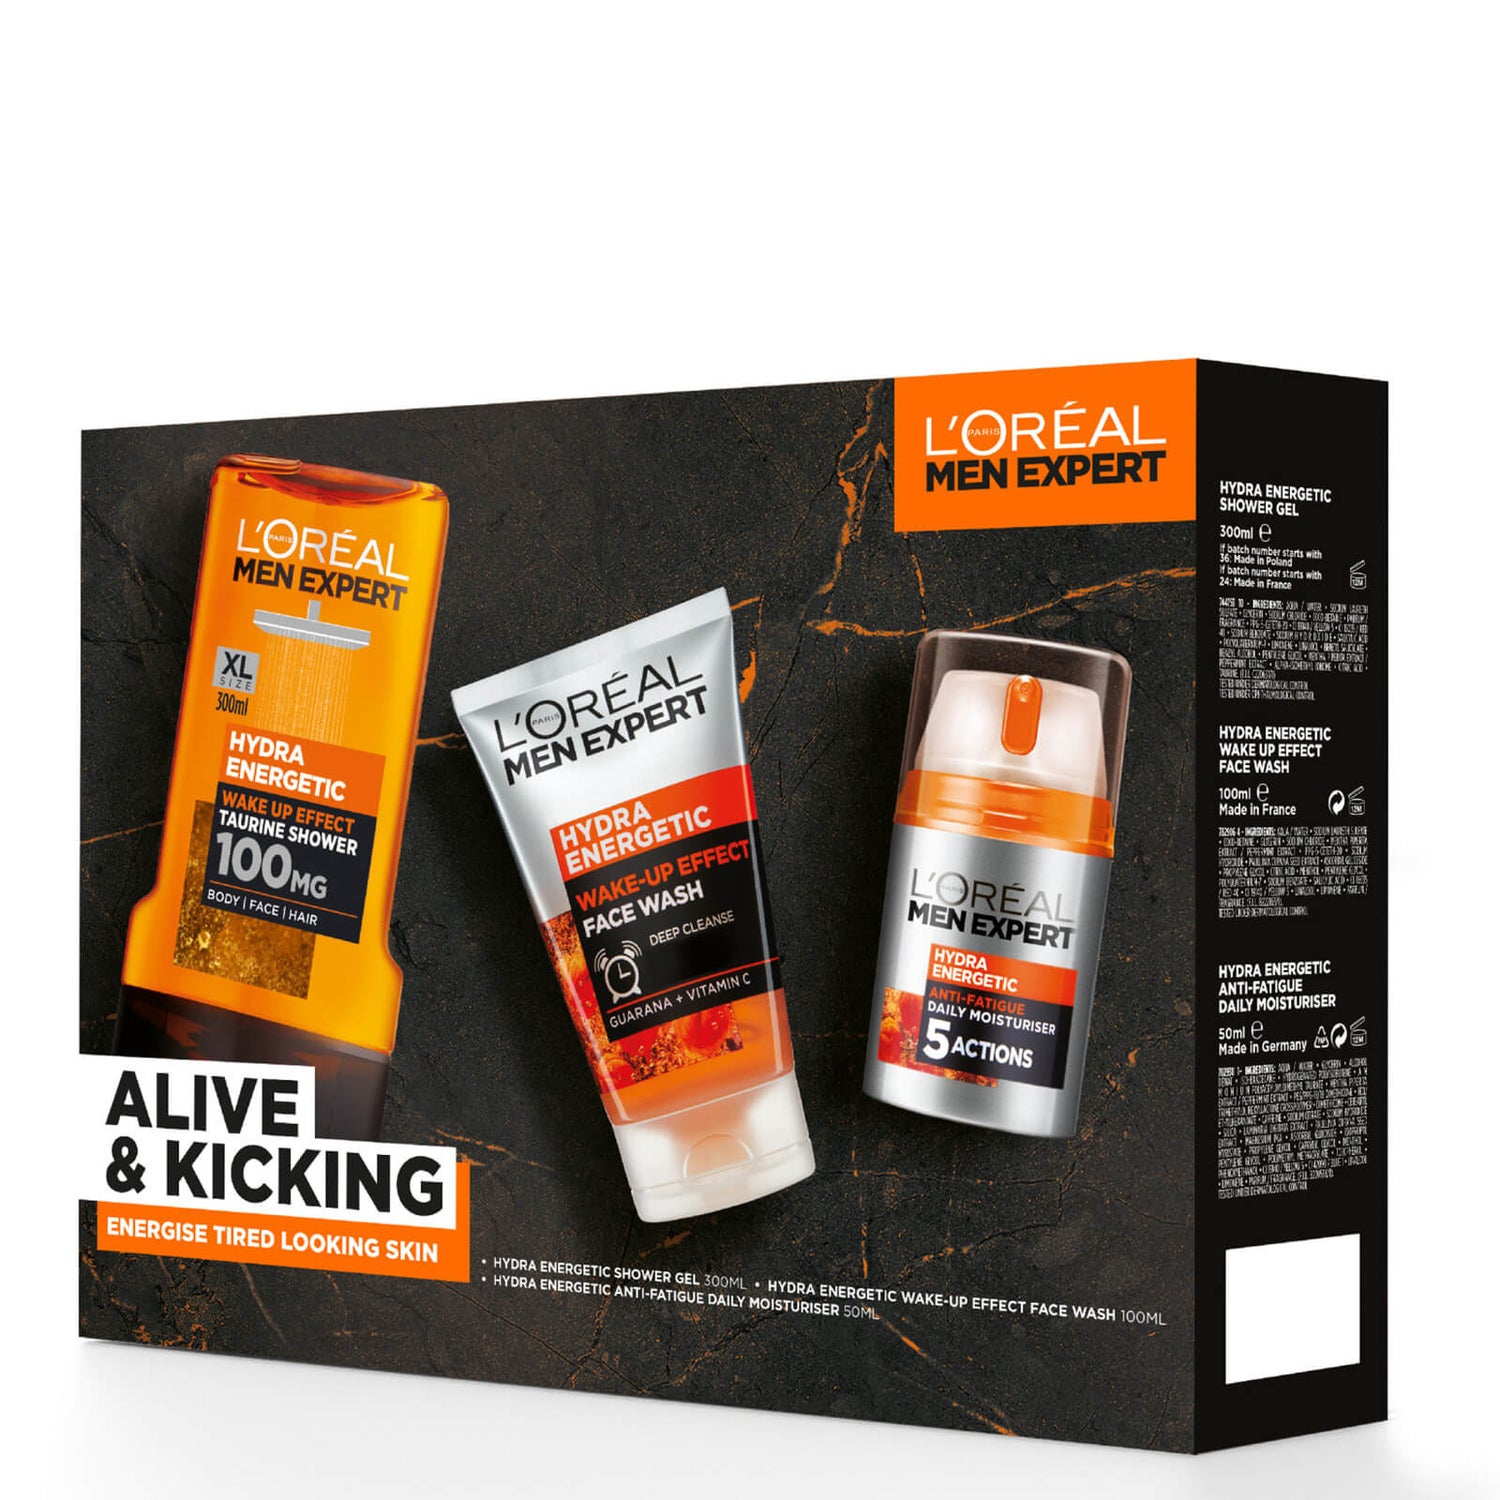 L'Oreal Paris Men Expert Alive and Kicking 3 Piece Gift Set For Him (Worth £18.00)